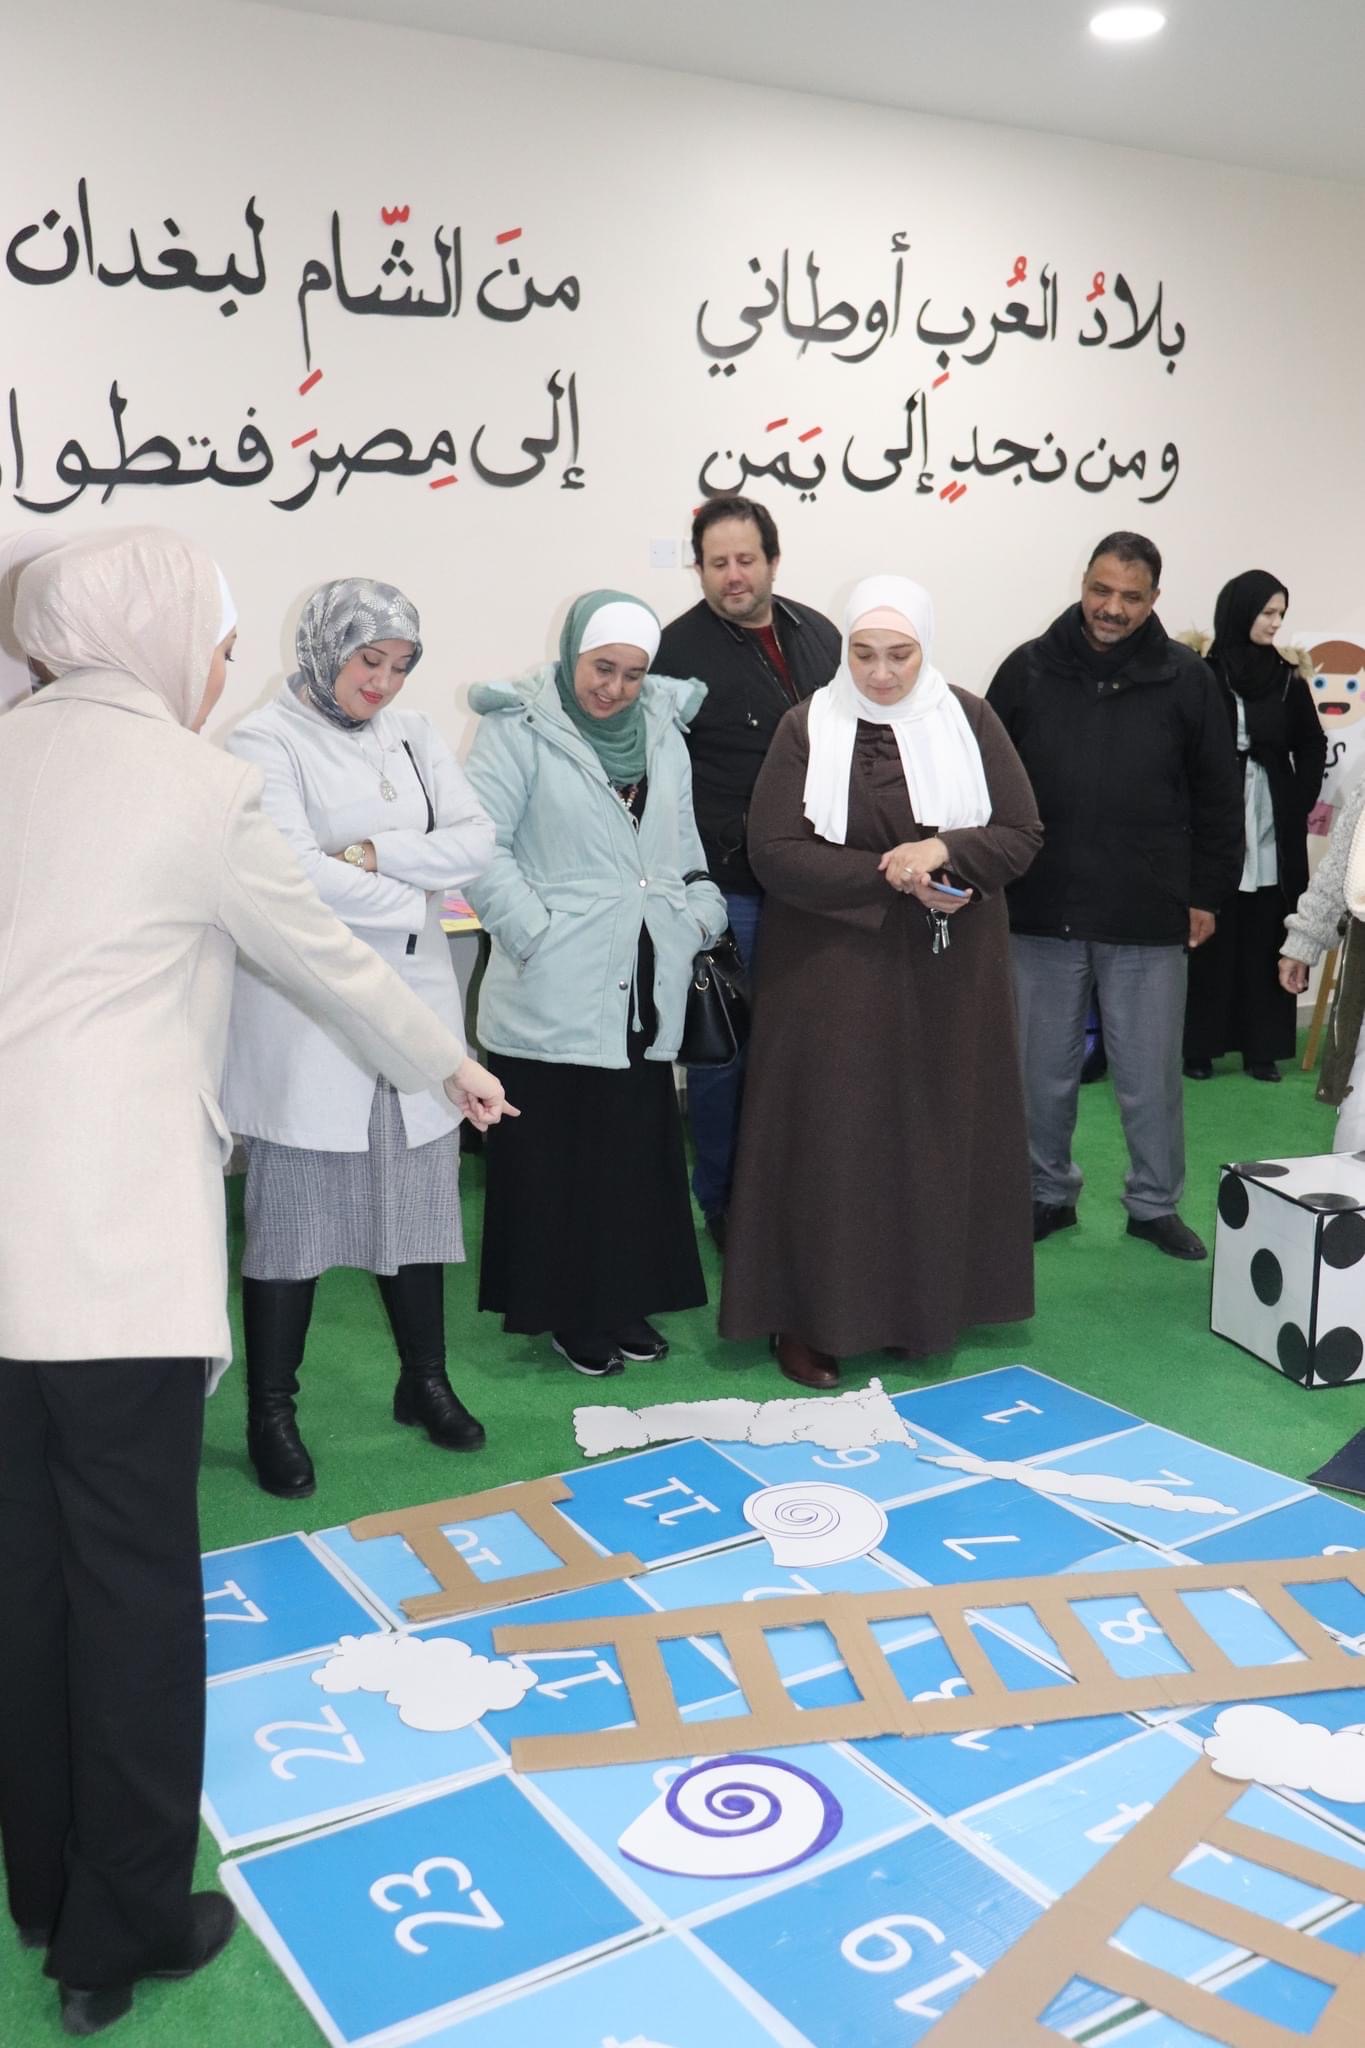 Ms. Reem explains the game for Coordinators from the Prime Ministry of Education,  Mrs. Hiba, Mrs. Mnal, Mrs. Esara , Mr. Fawzi , and Mr. Jaser